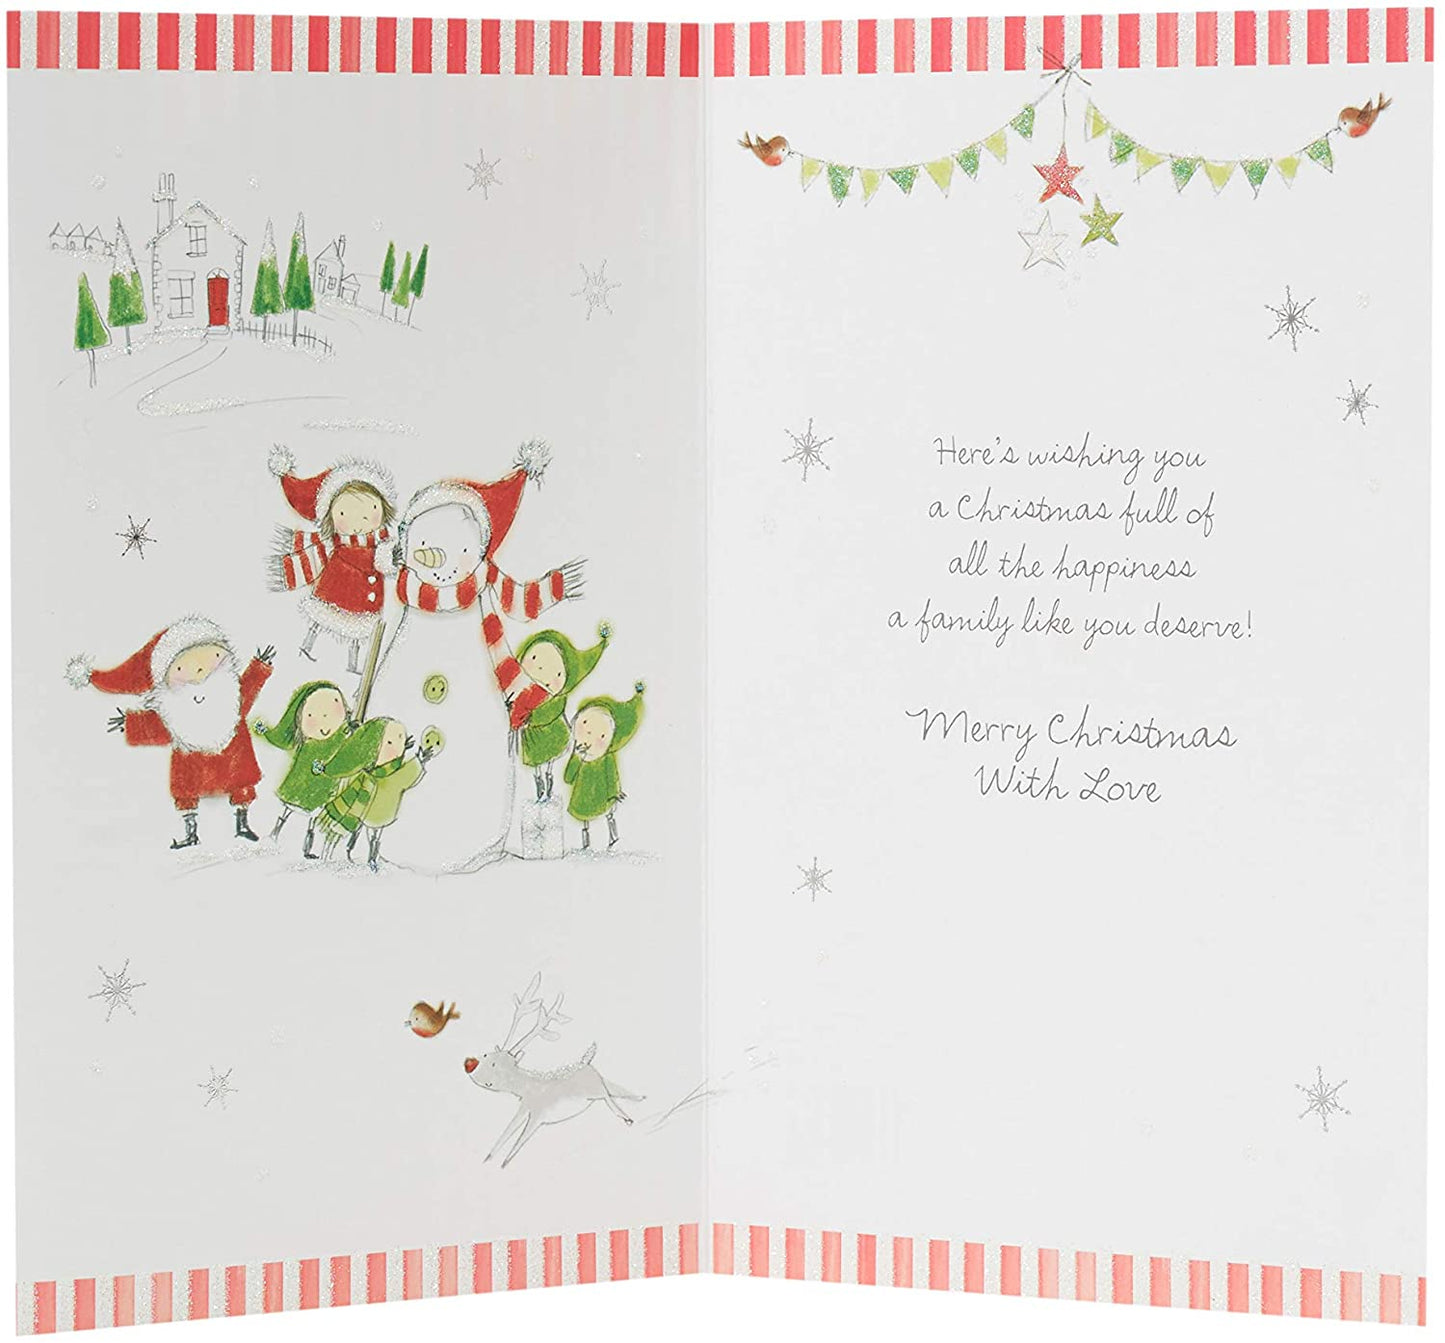 Daughter and Family Christmas Card with Red Bow